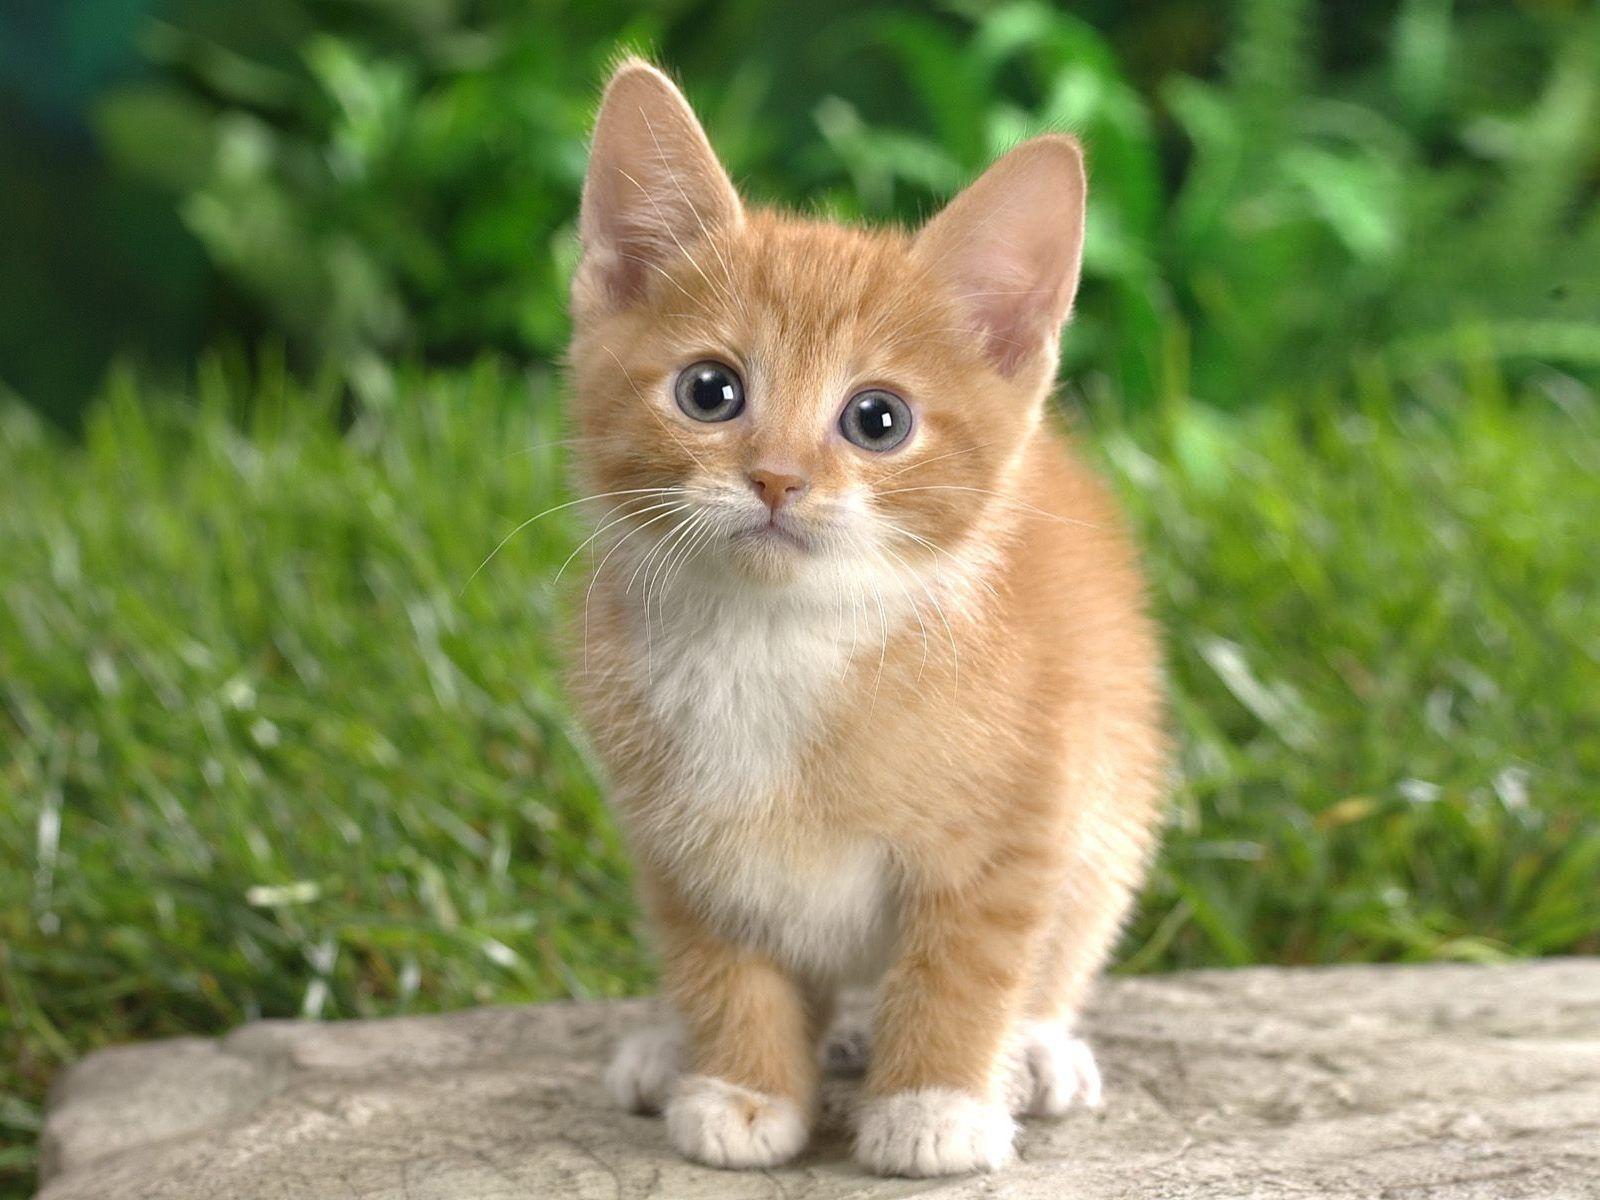 Cute Cat Image For Desktop Wallpaper and Picture